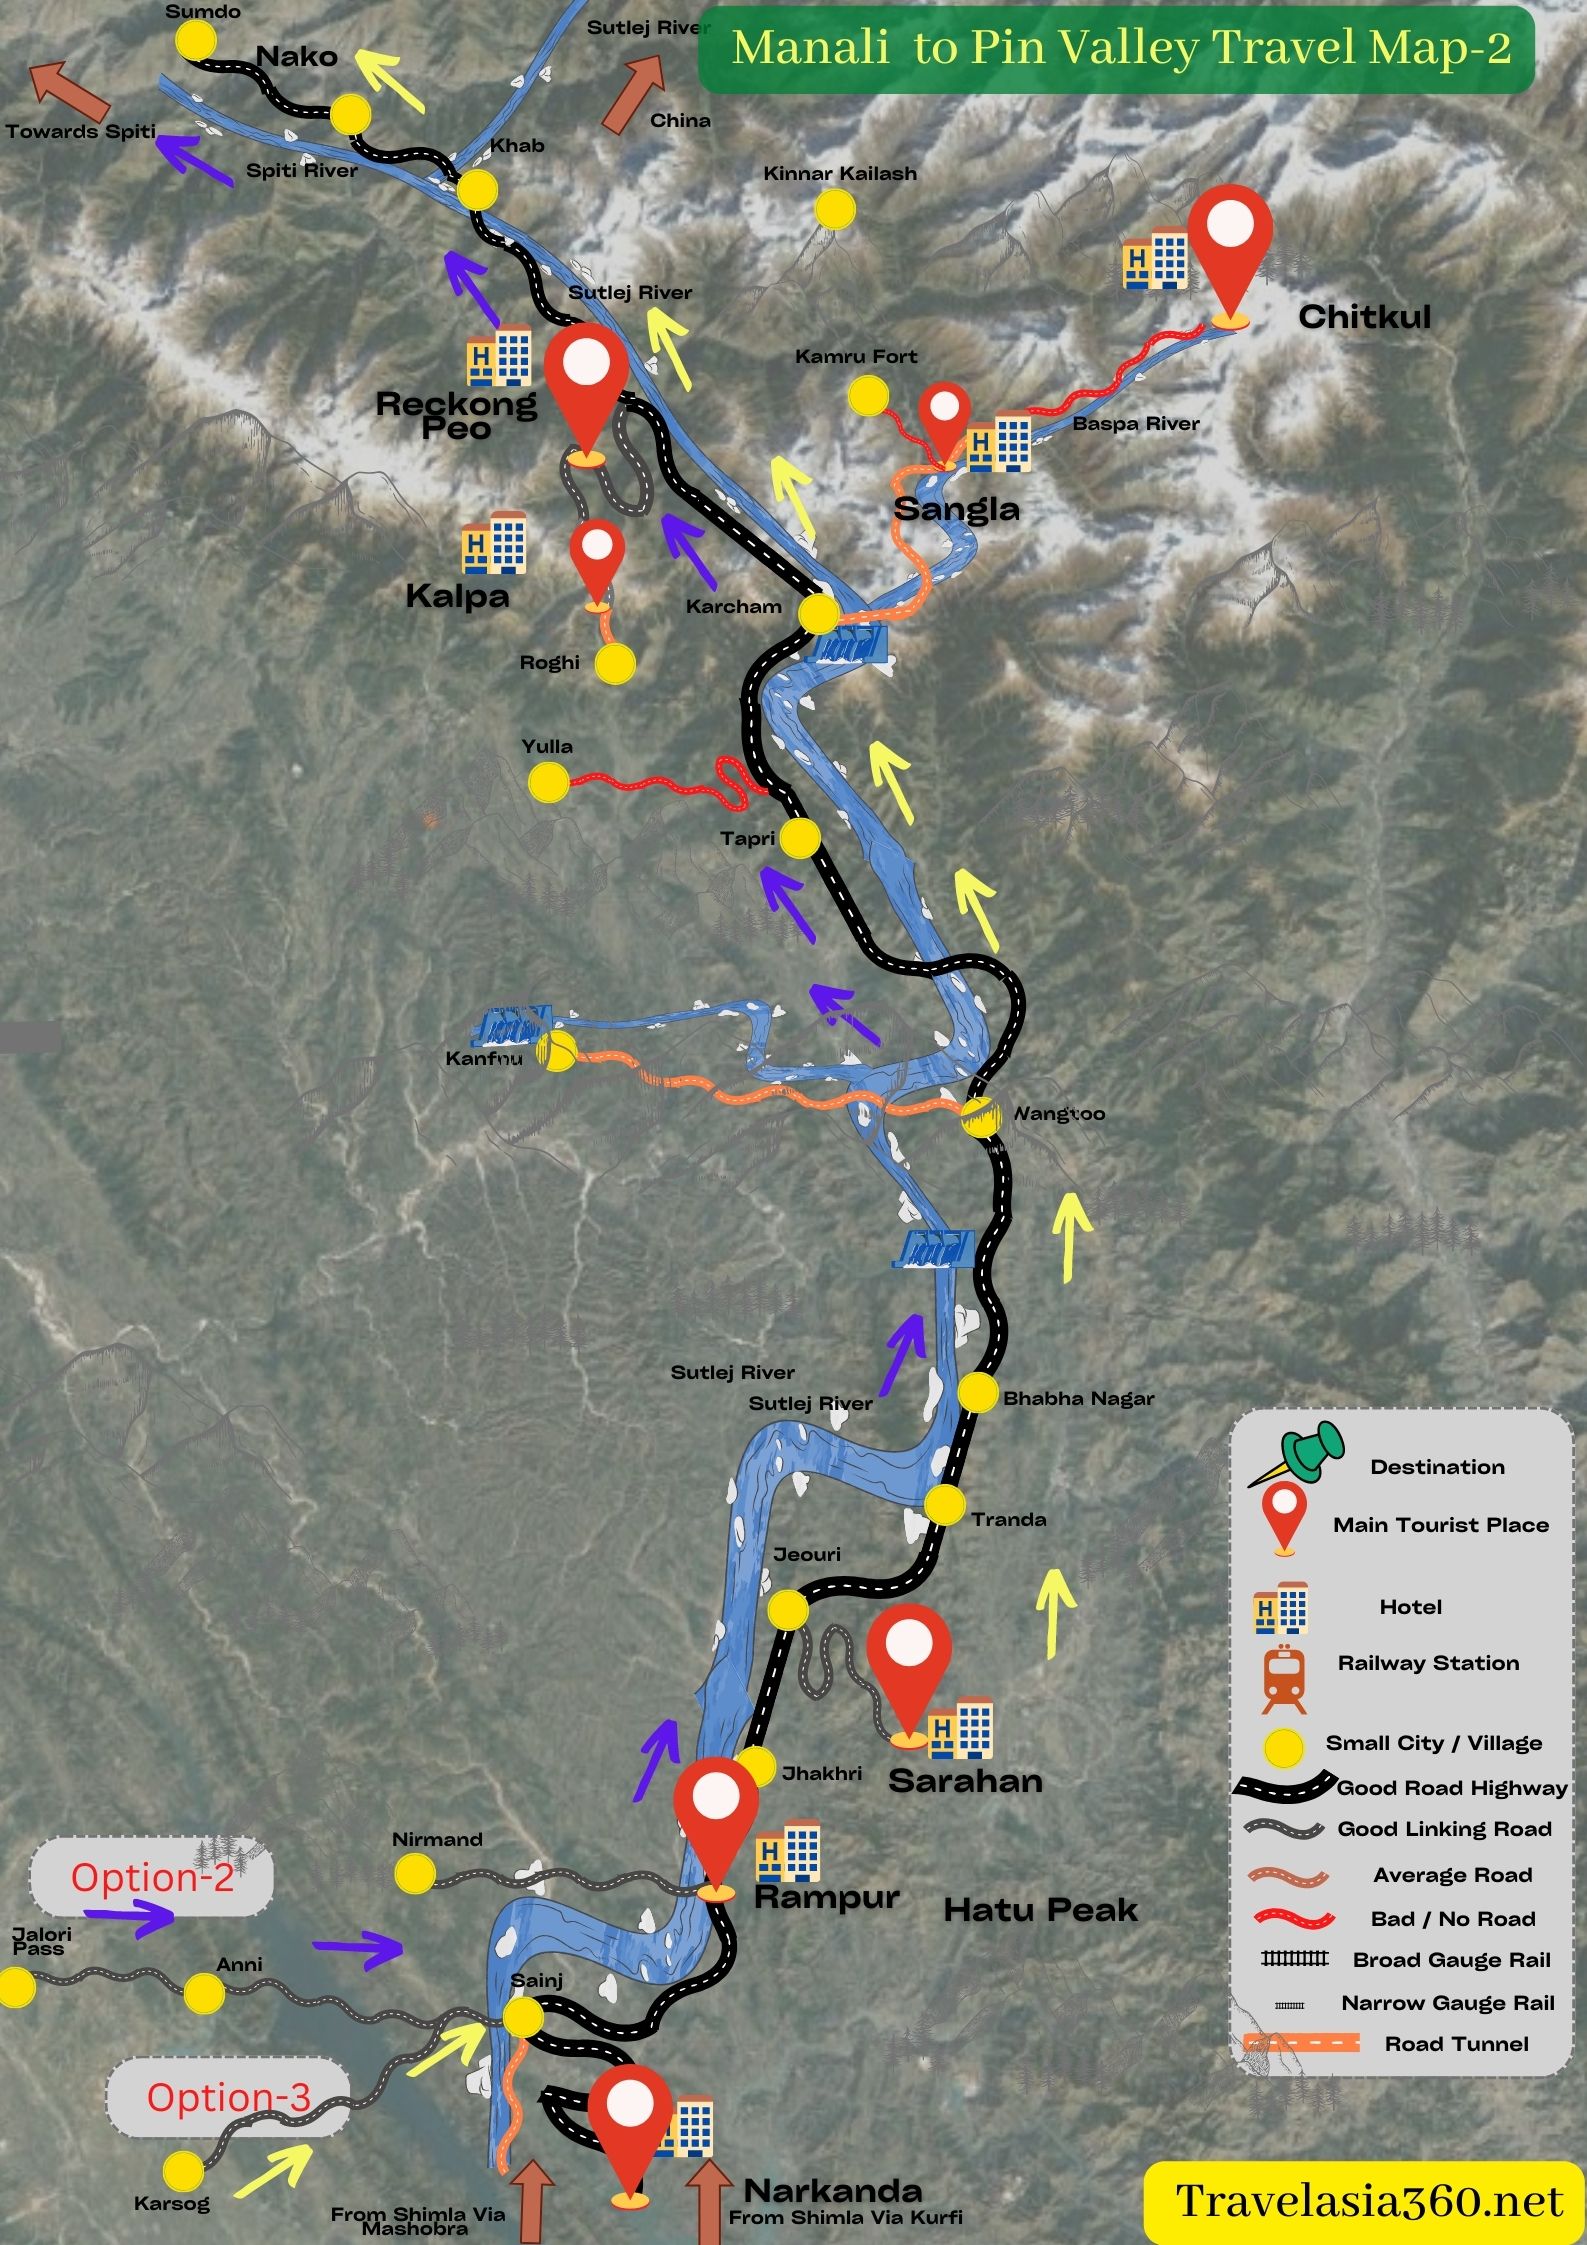 how to reach Mud Pin Valley from Manali